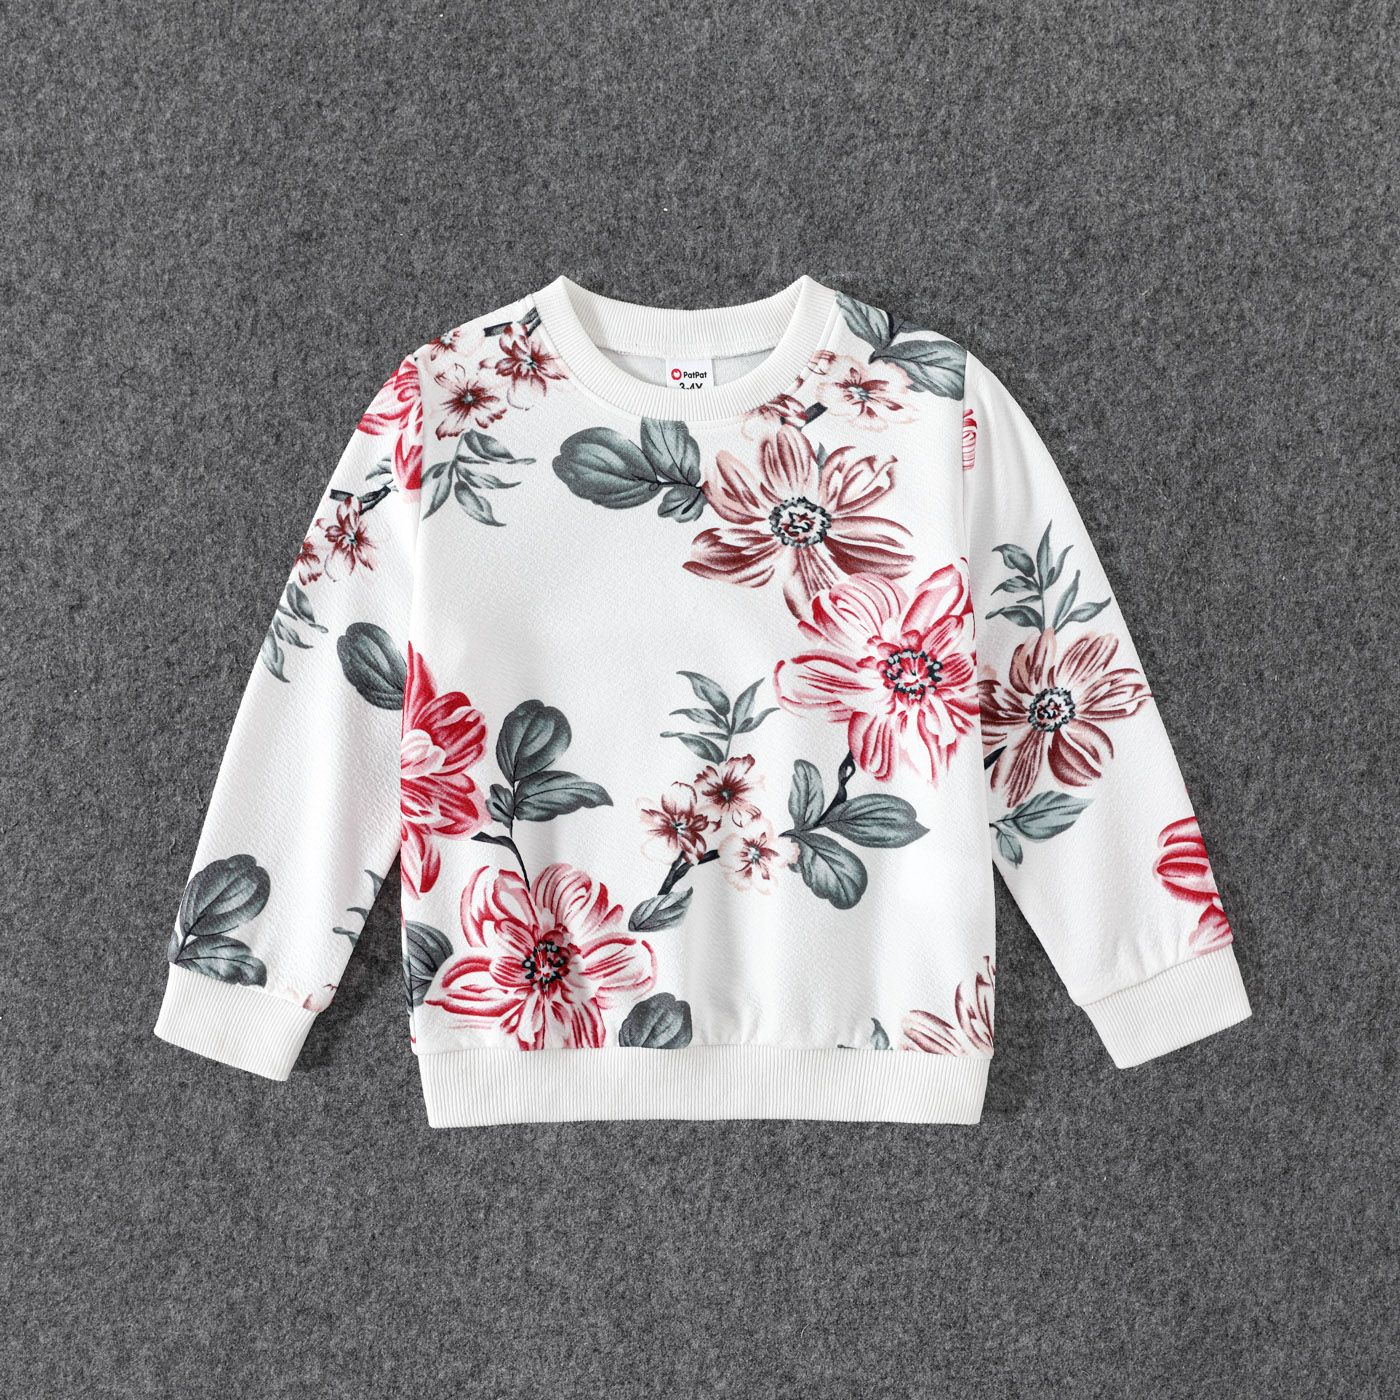 floral print crewneck drop shoulder lace  long-sleeve tops for mom and me